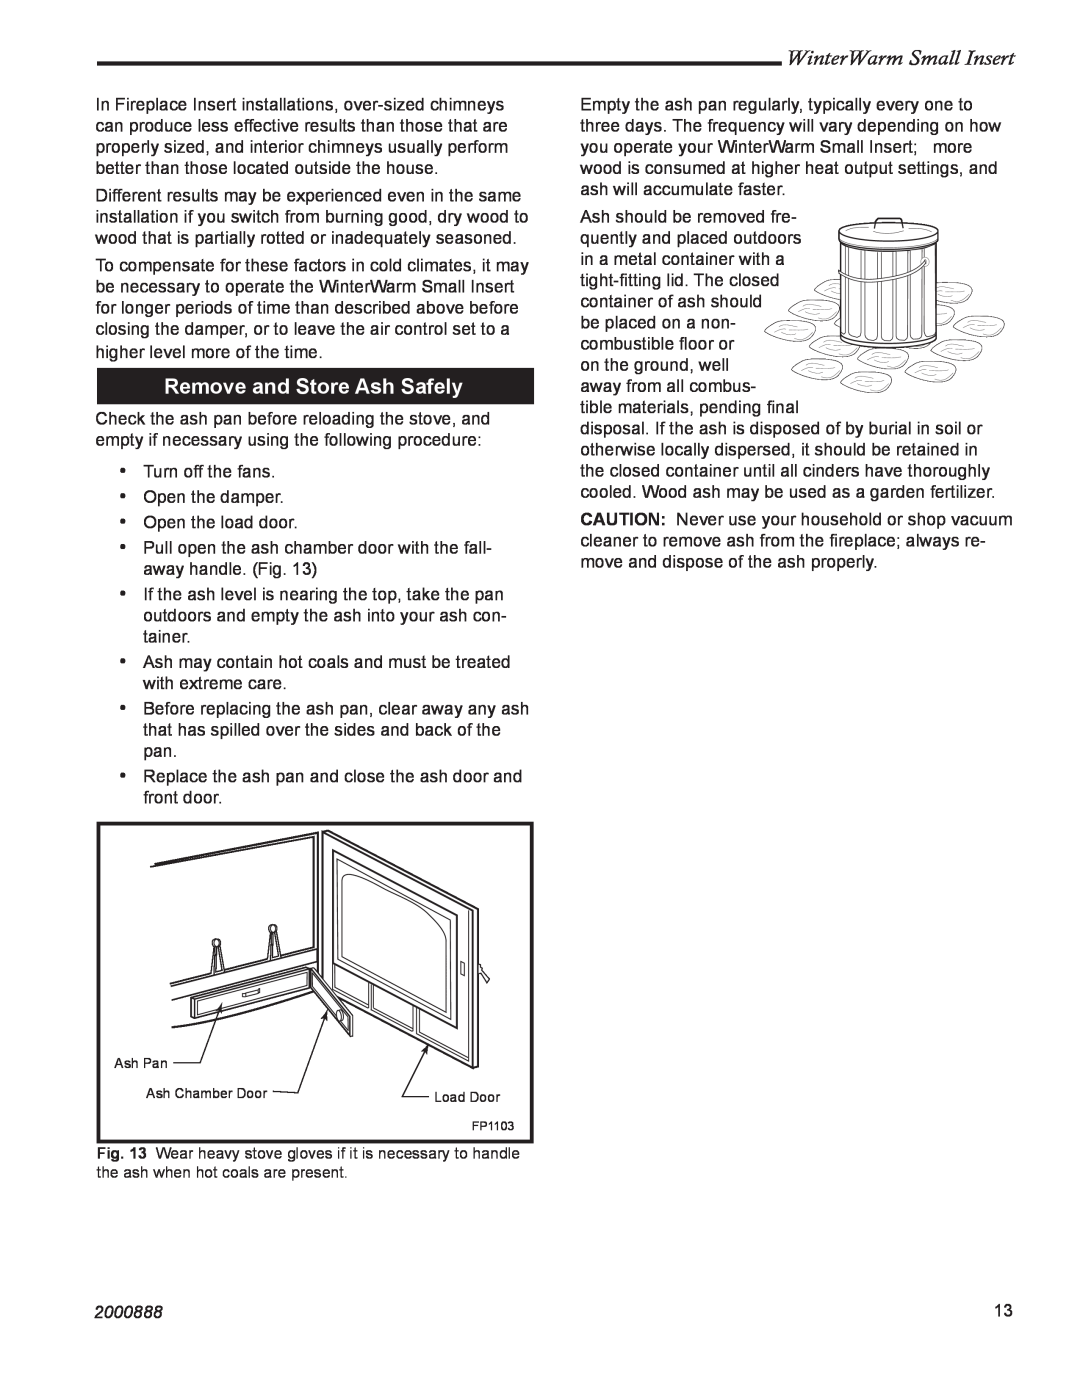 Vermont Casting 2080 installation instructions Remove and Store Ash Safely, WinterWarm Small Insert, 2000888 